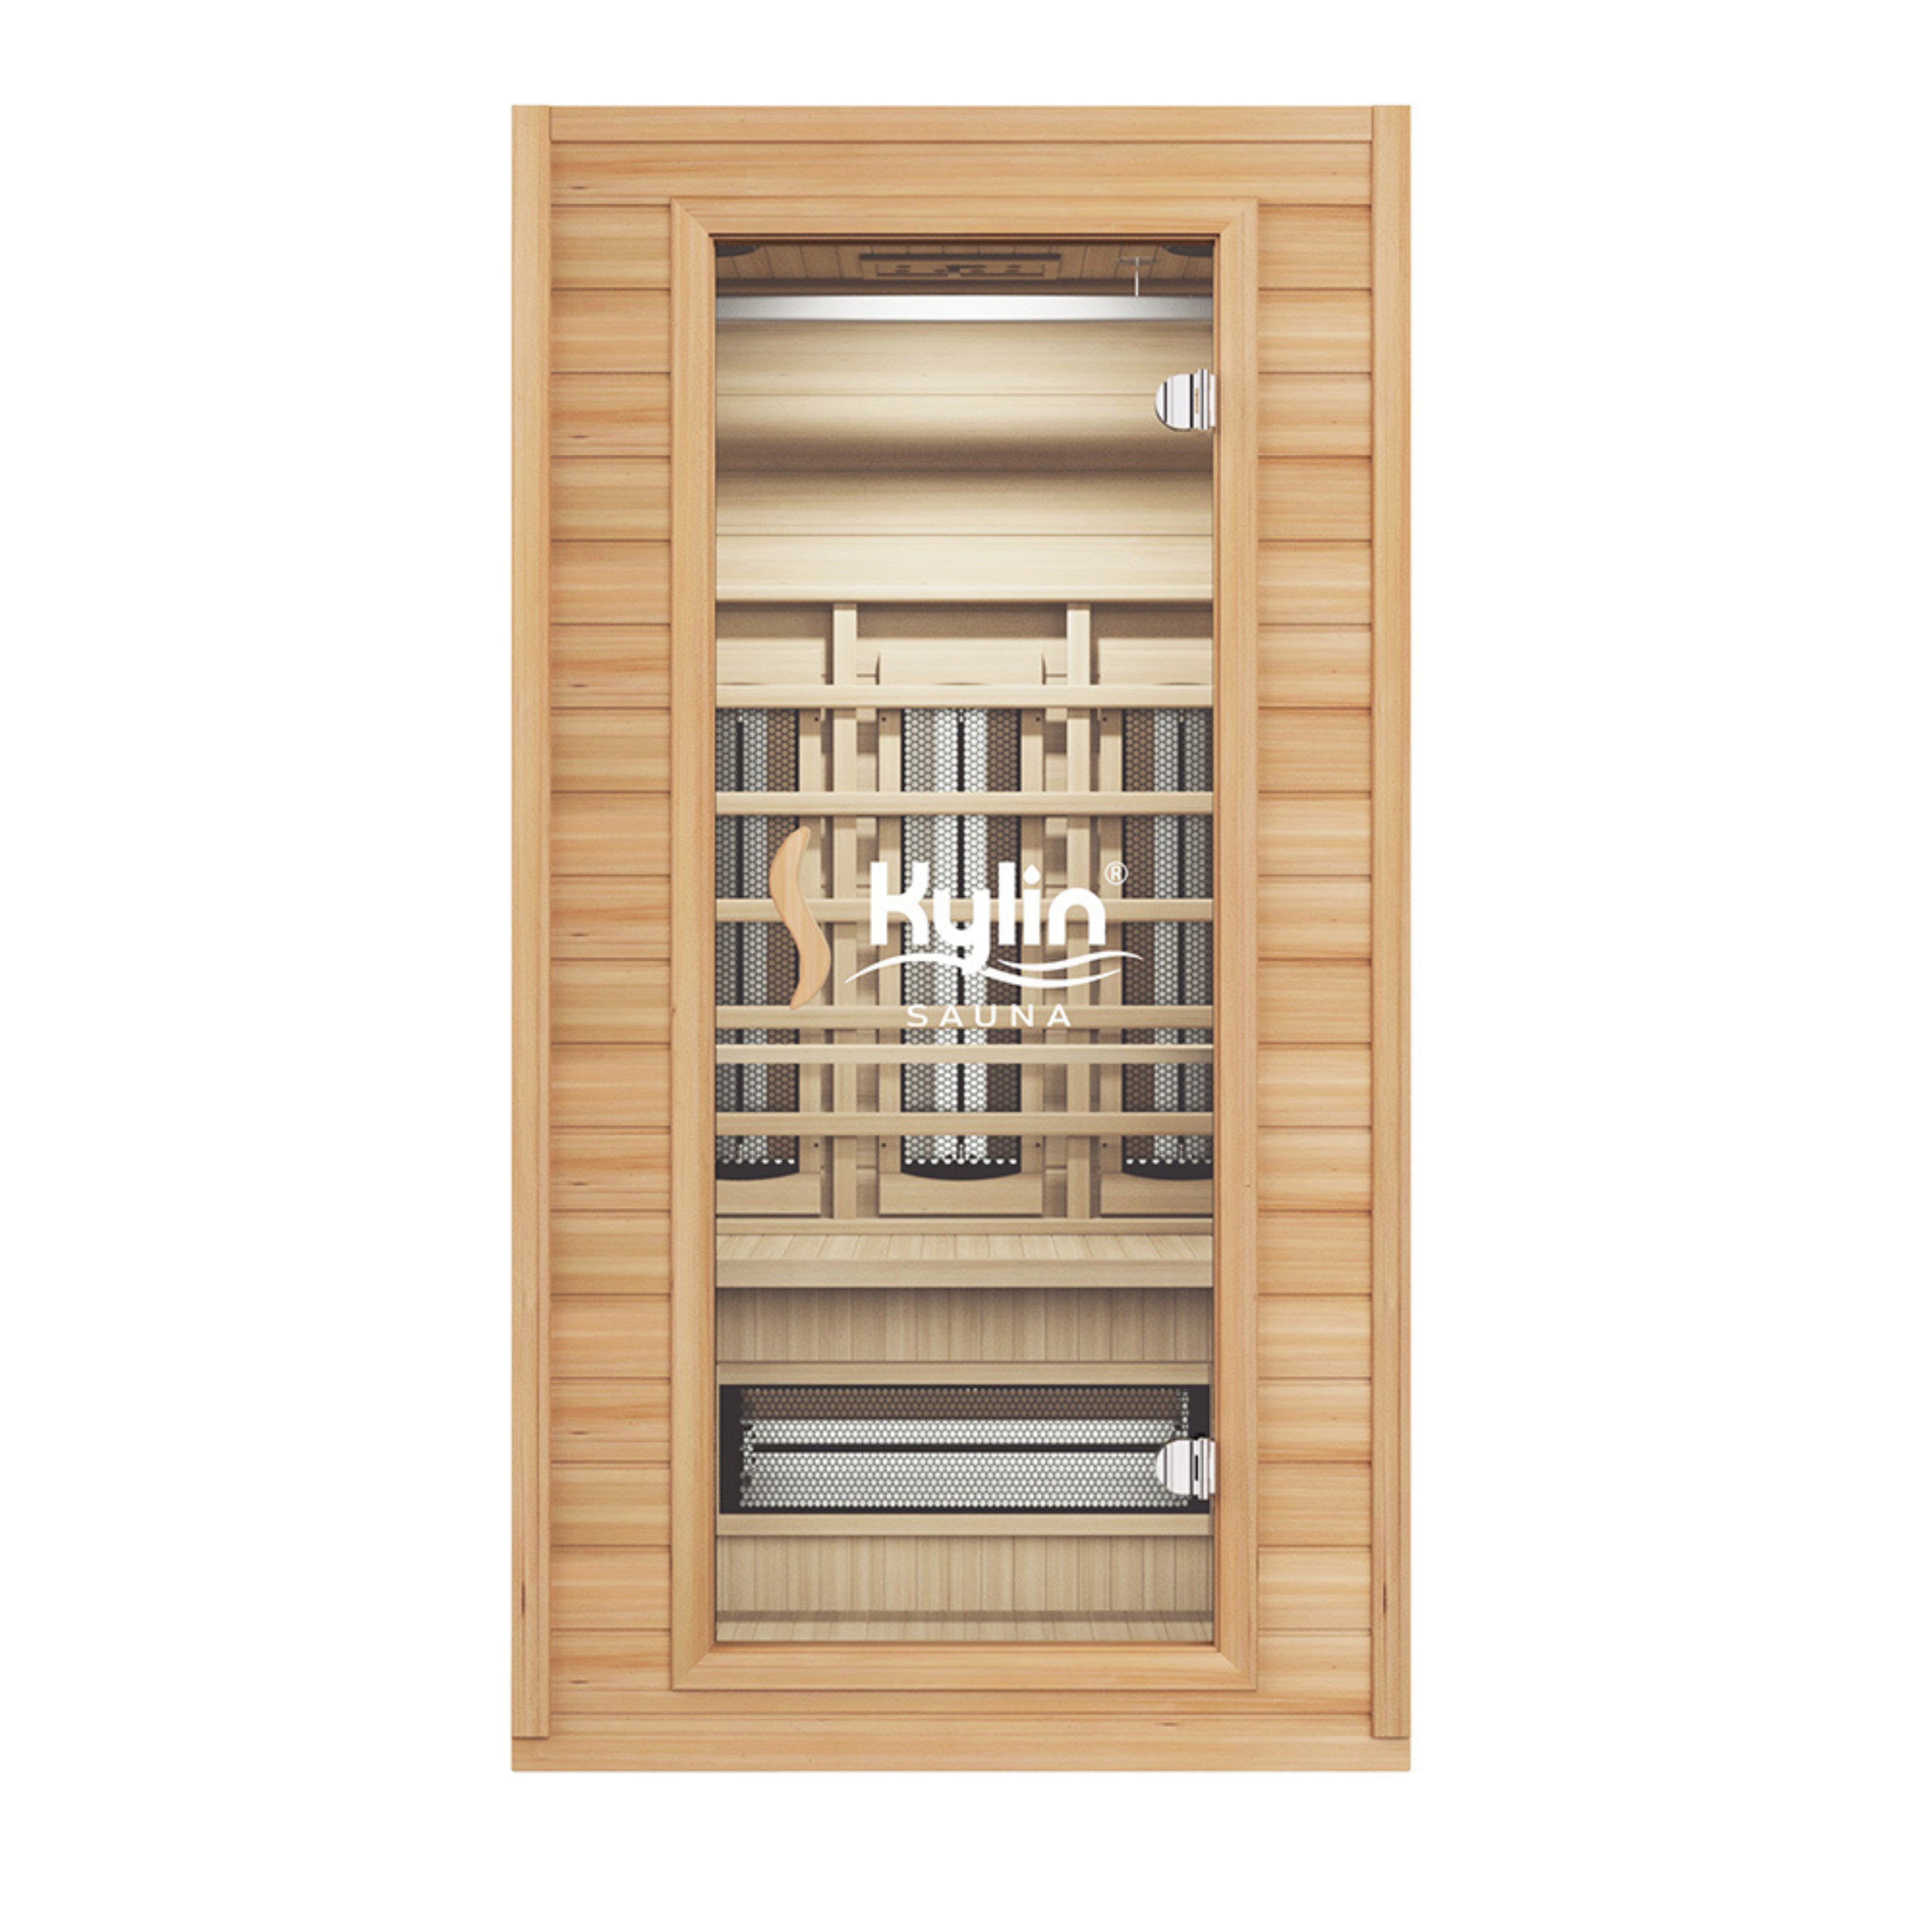 KYLIN CERAMIC 1 PERSON INFRARED SAUNA ROOM WITH PORTABLE TABLE